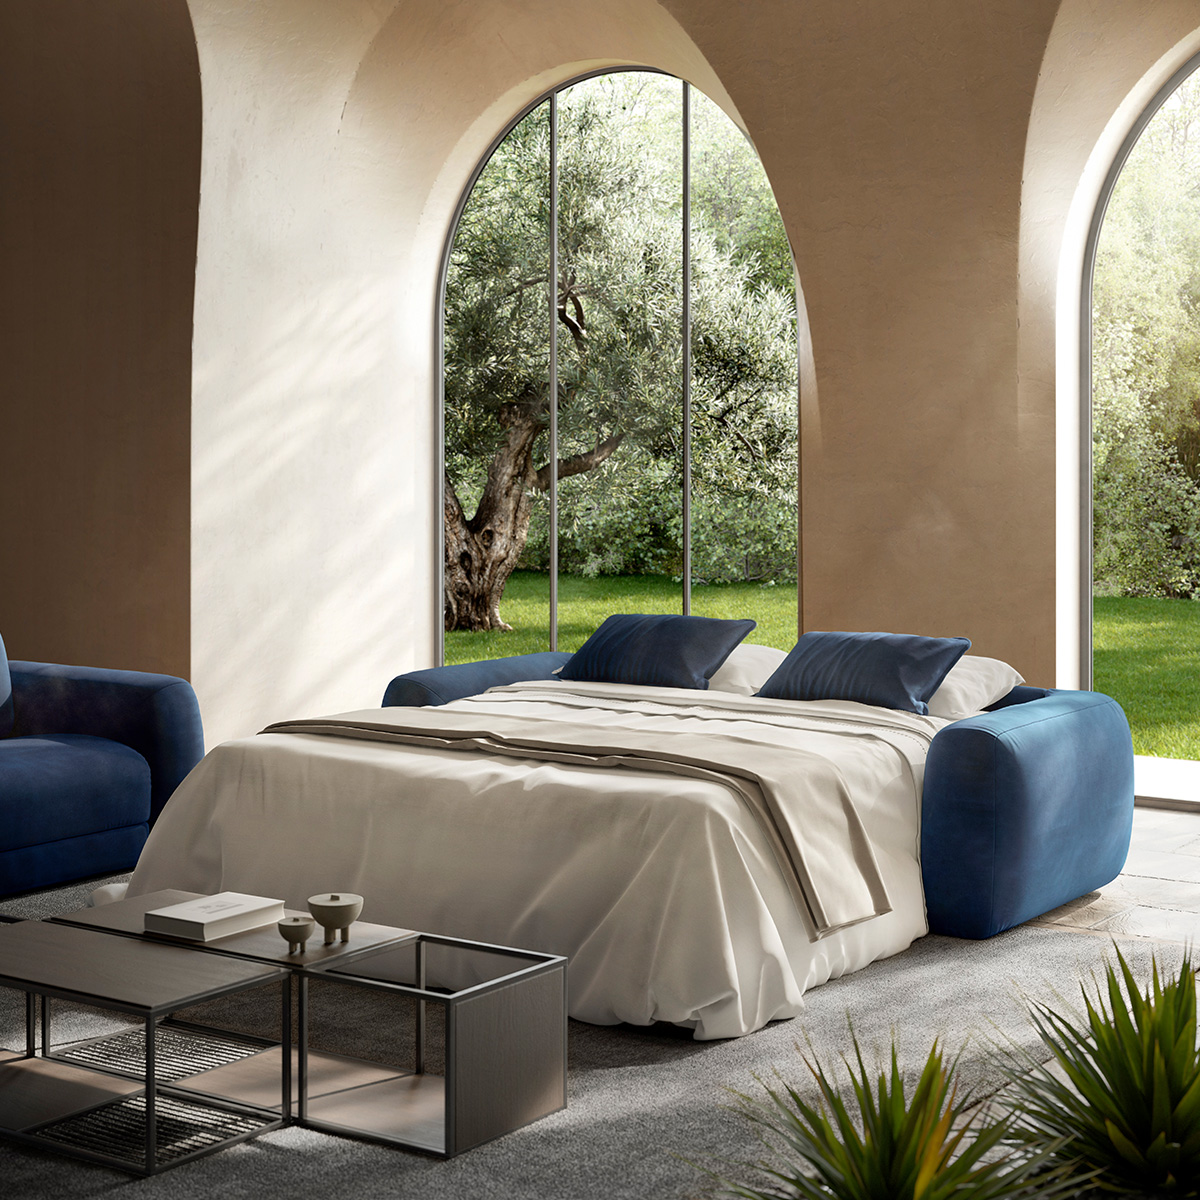 Natuzzi editorial - Mecanismo «ready-to-bed»